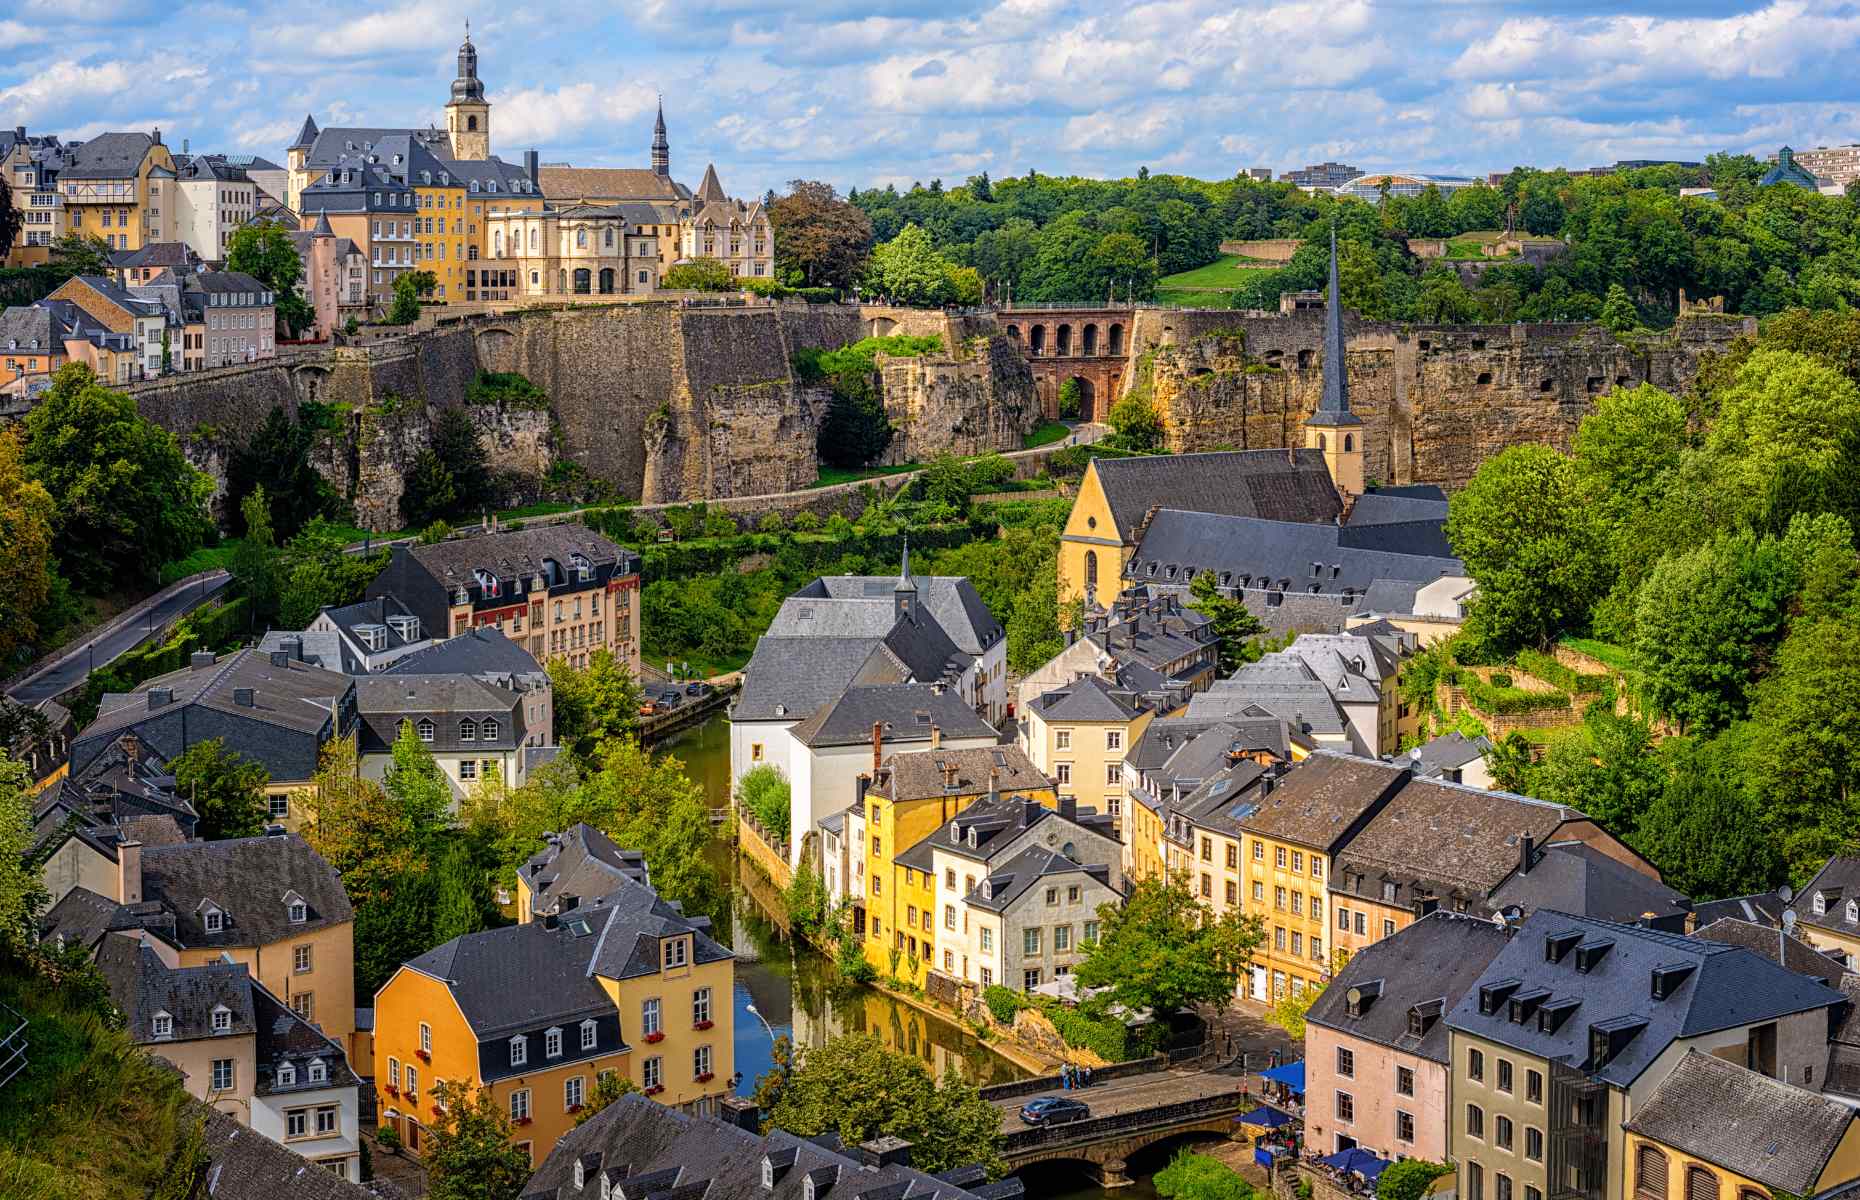 Old Town and Grund, Luxembourg City, Luxembourg (Image: Boris Stroujko/Shutterstock)